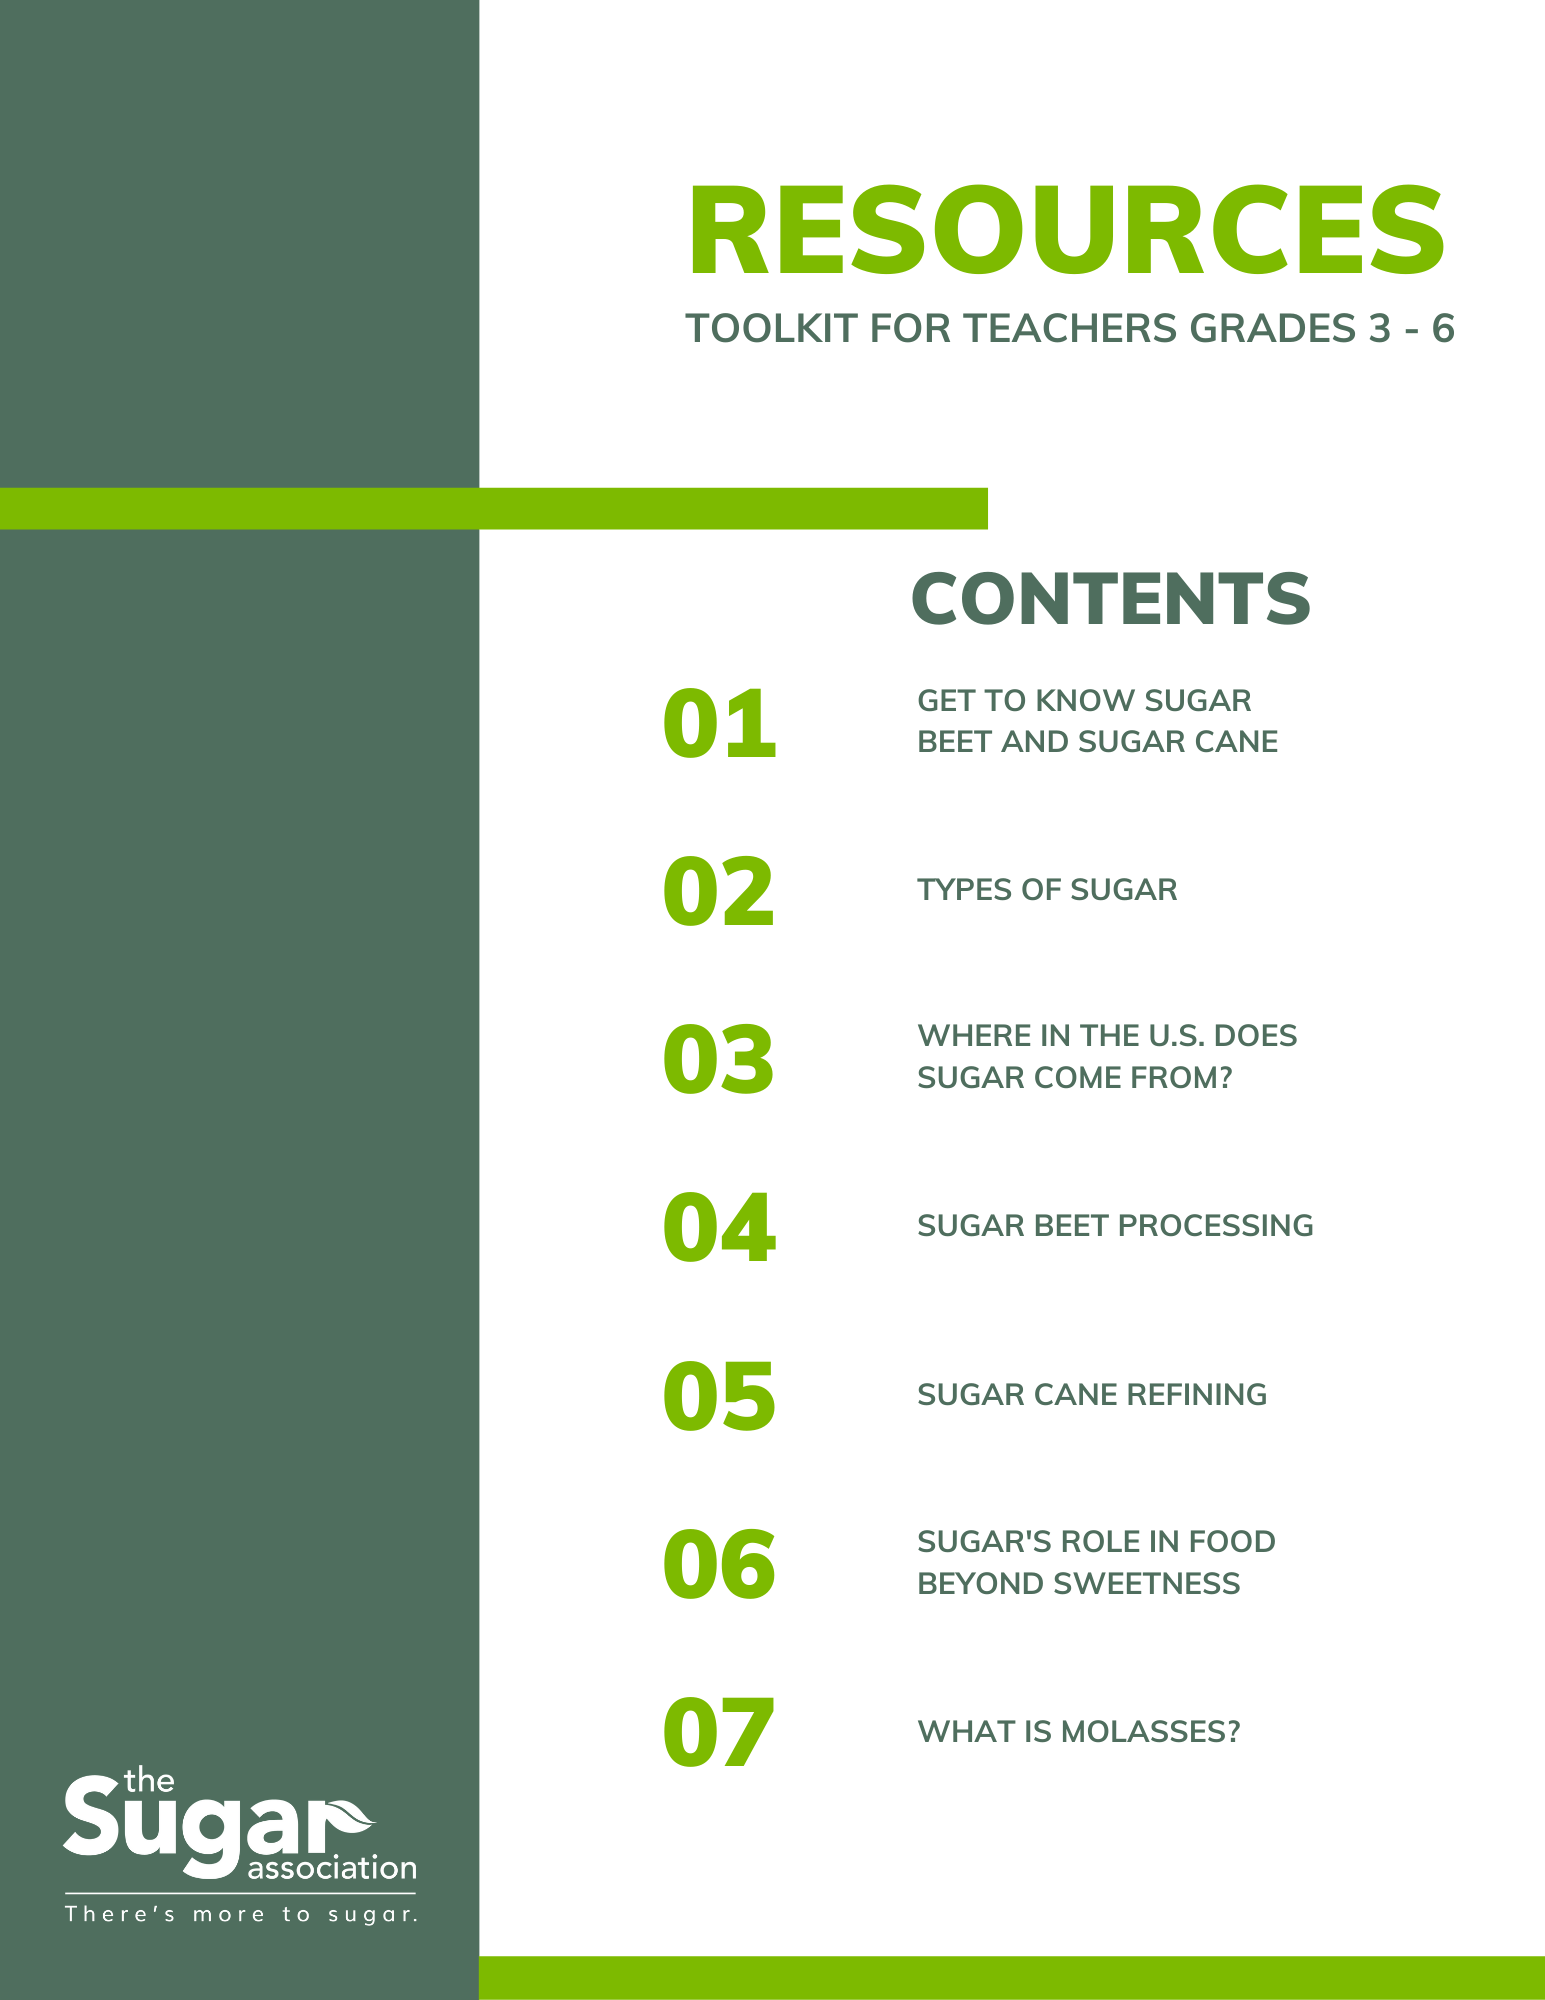 Resource Toolkit for Grades 3-6